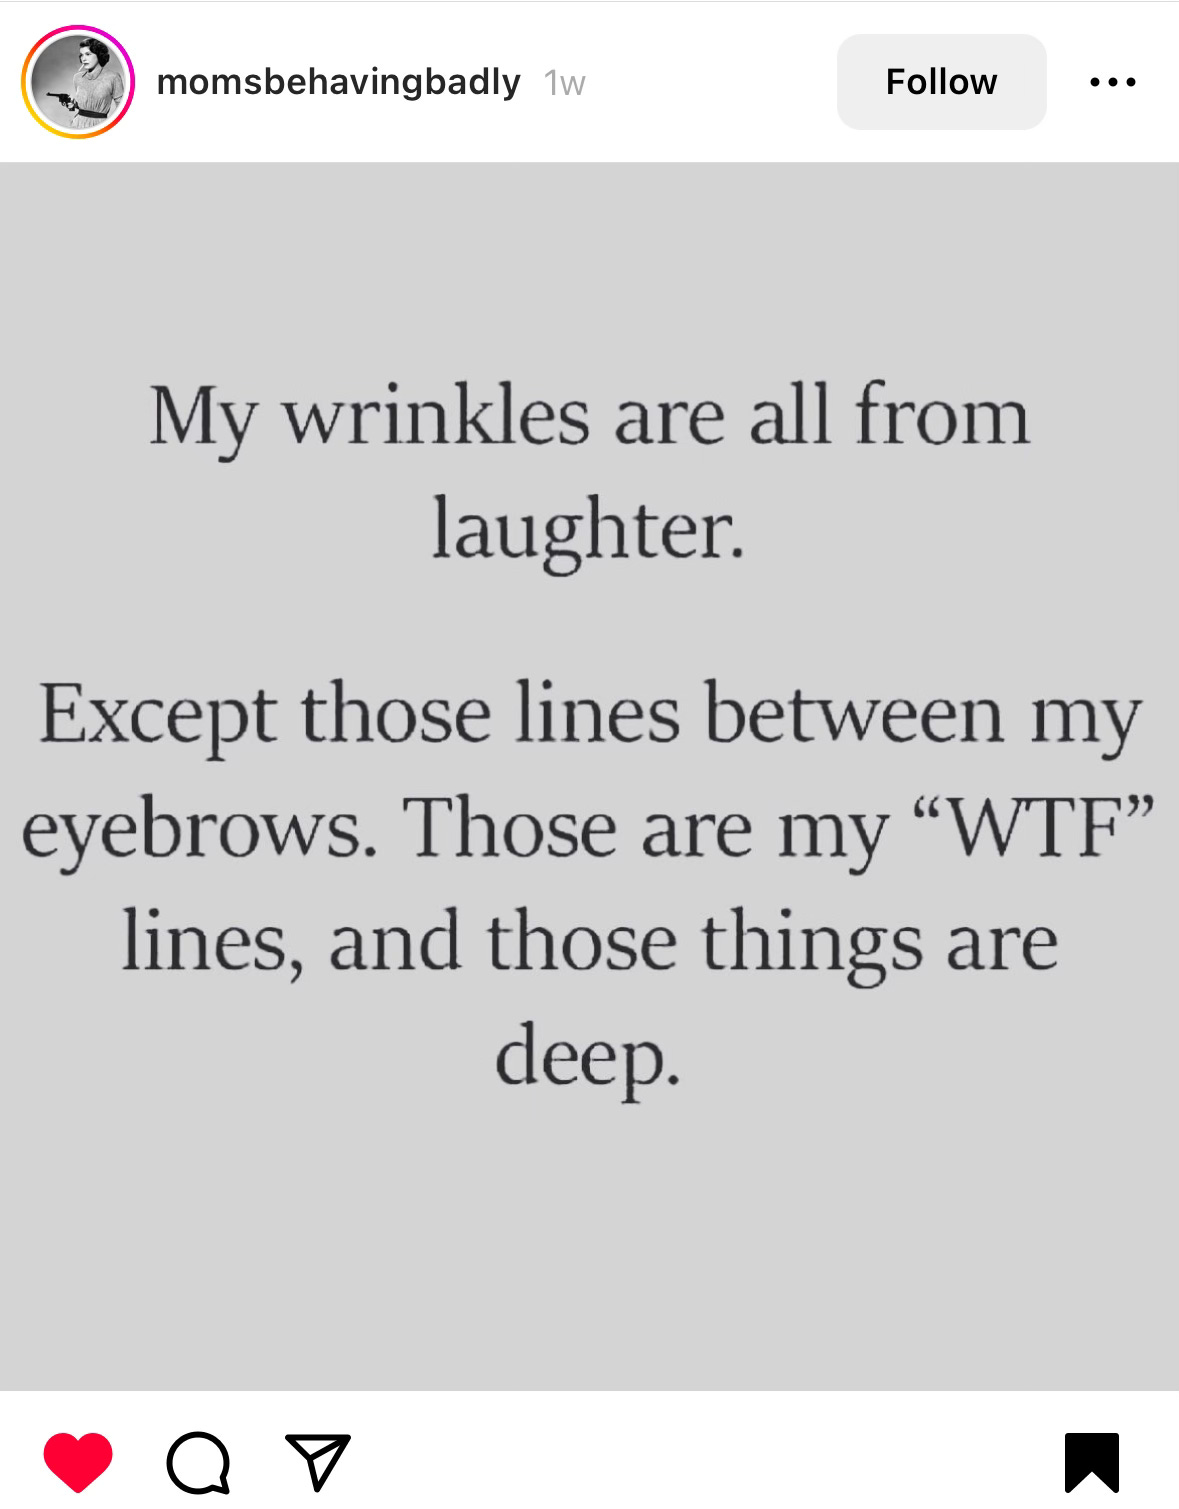 An Instagram post that reads: My wrinkles are all from laughter. Except those lines between my eyebrows. Those are my "WTF" lines, and those things are deep.